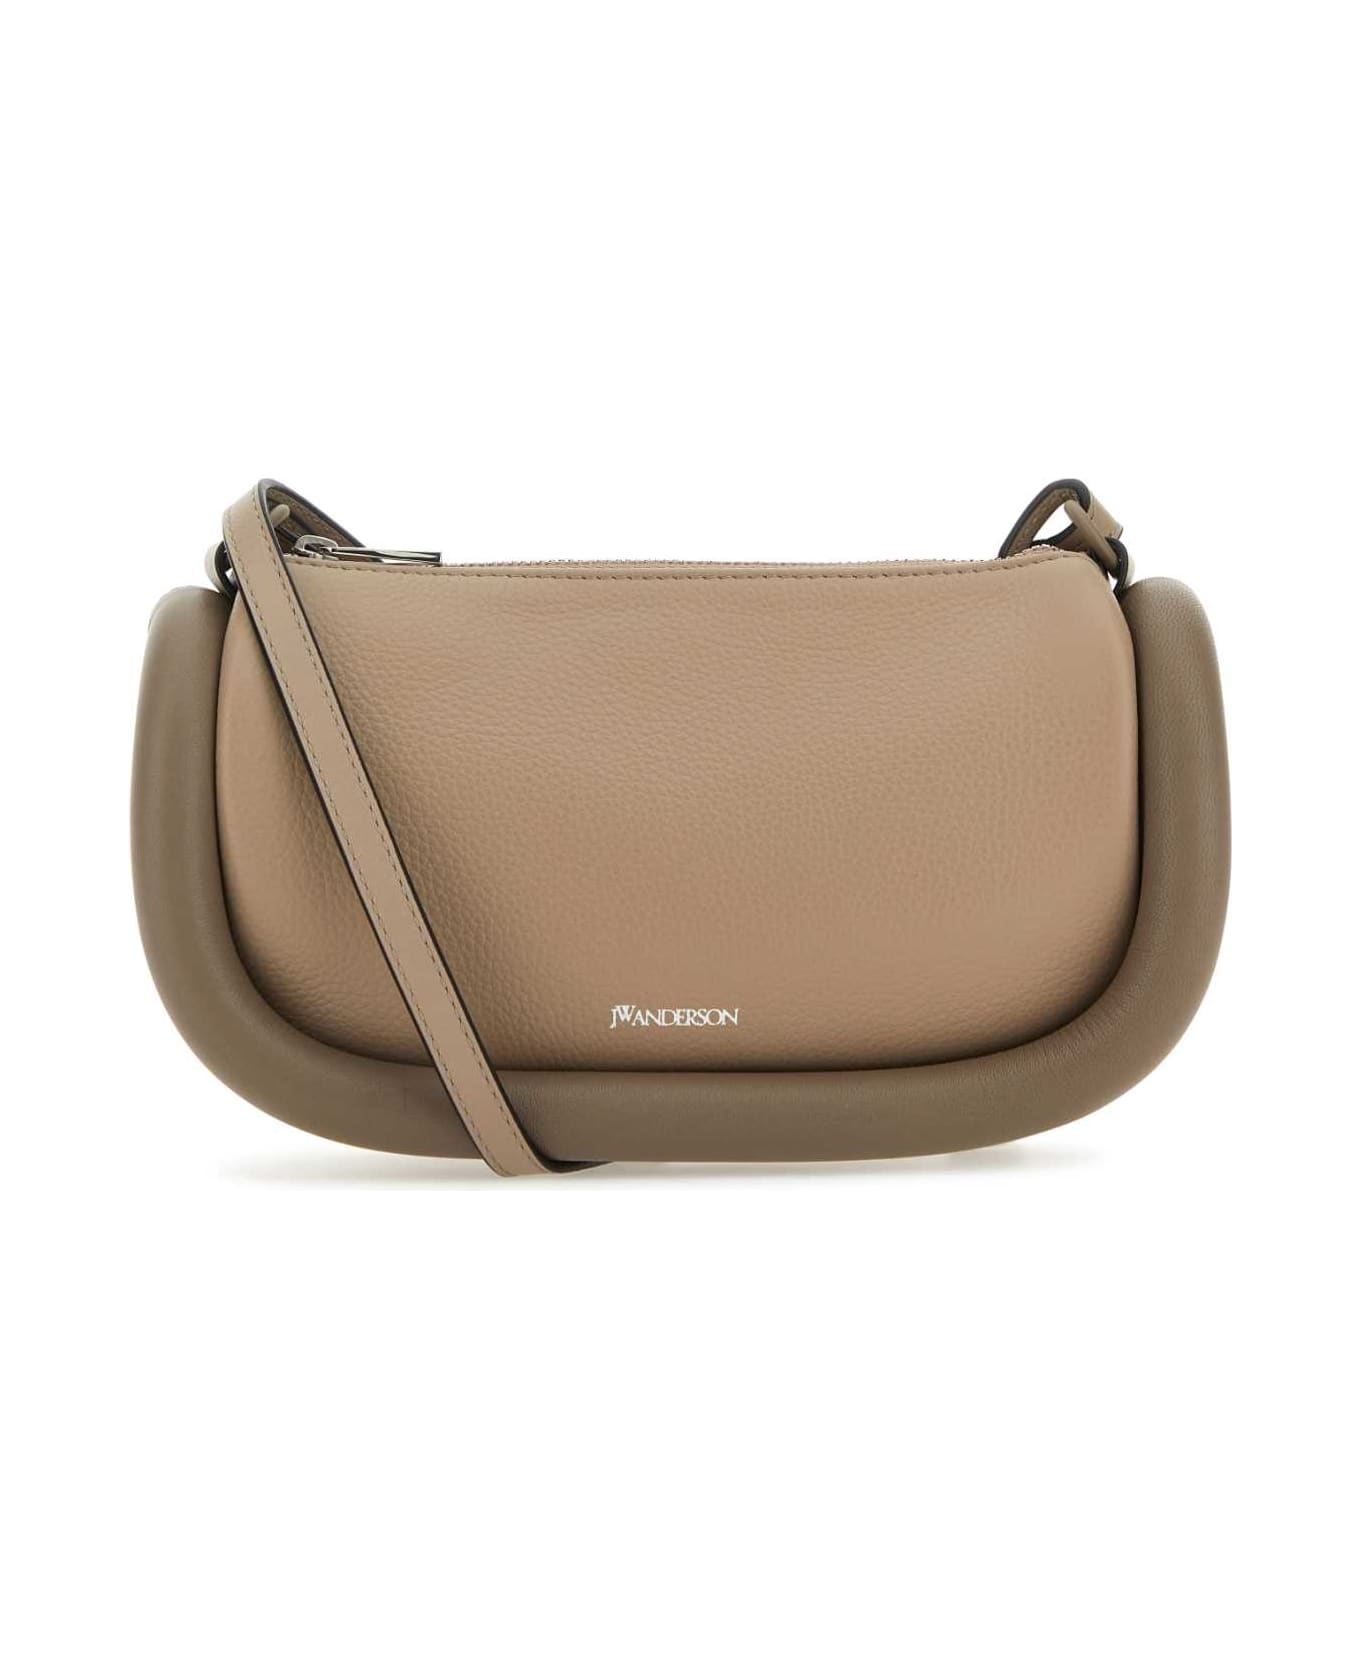 J.W. Anderson Cappuccino Leather The Bumper 12 Crossbody Bag - TAUPE